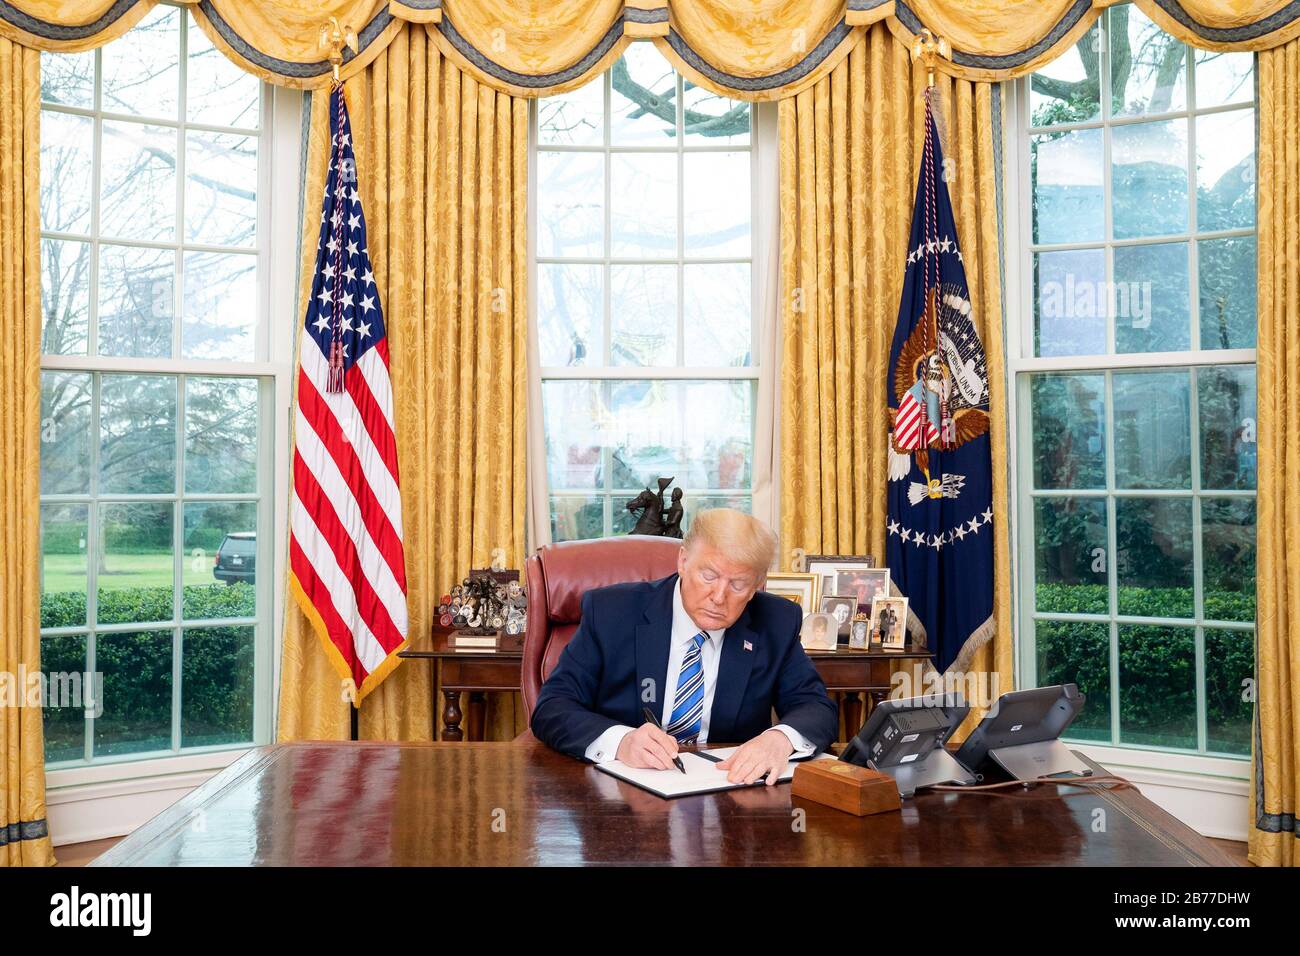 Washington, United States Of America. 11th Mar, 2020. President Donald J. Trump signs a Presidential Memorandum for the Secretary of Health and Human Services and the Secretary of Labor on Making General Use Respirators Available Wednesday, March 11, 2020, in the Oval Office of the White House. People: President Donald Trump Credit: Storms Media Group/Alamy Live News Stock Photo